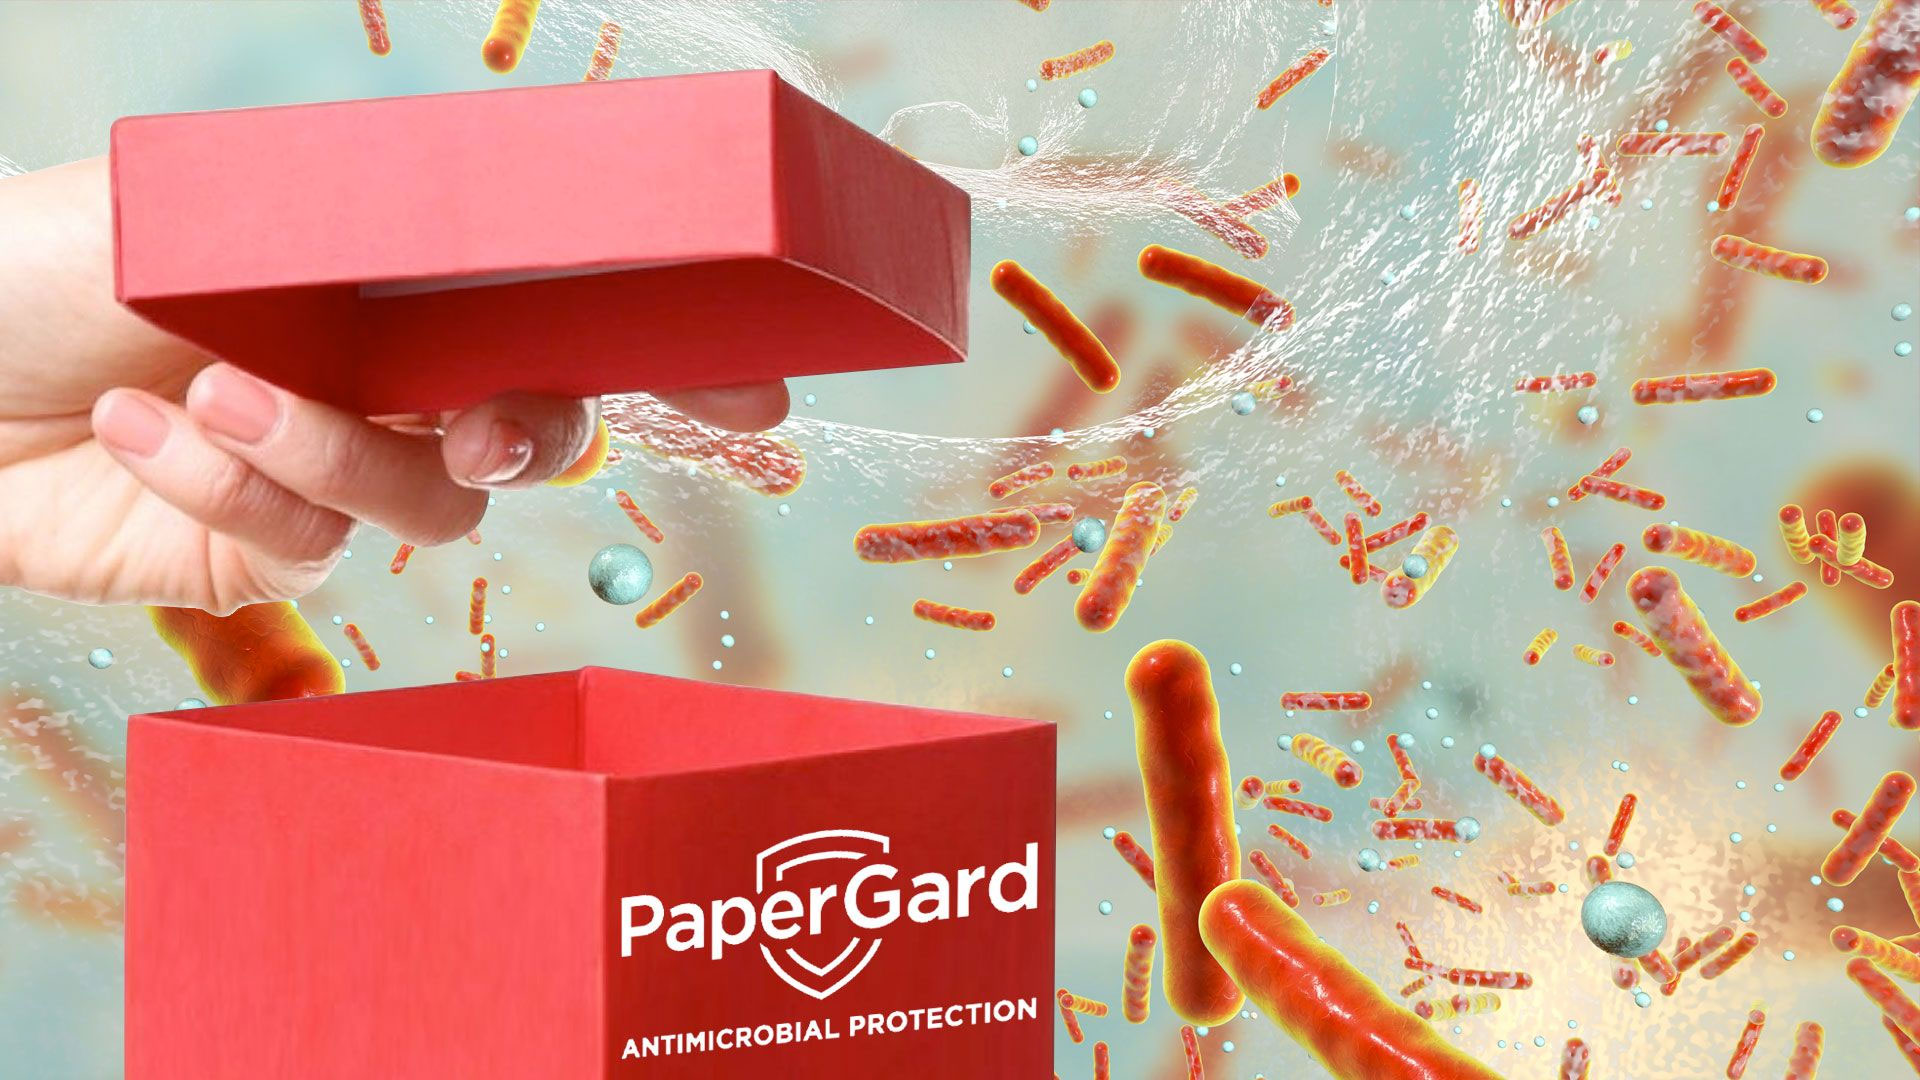 James Cropper's PaperGard antimicrobial paper